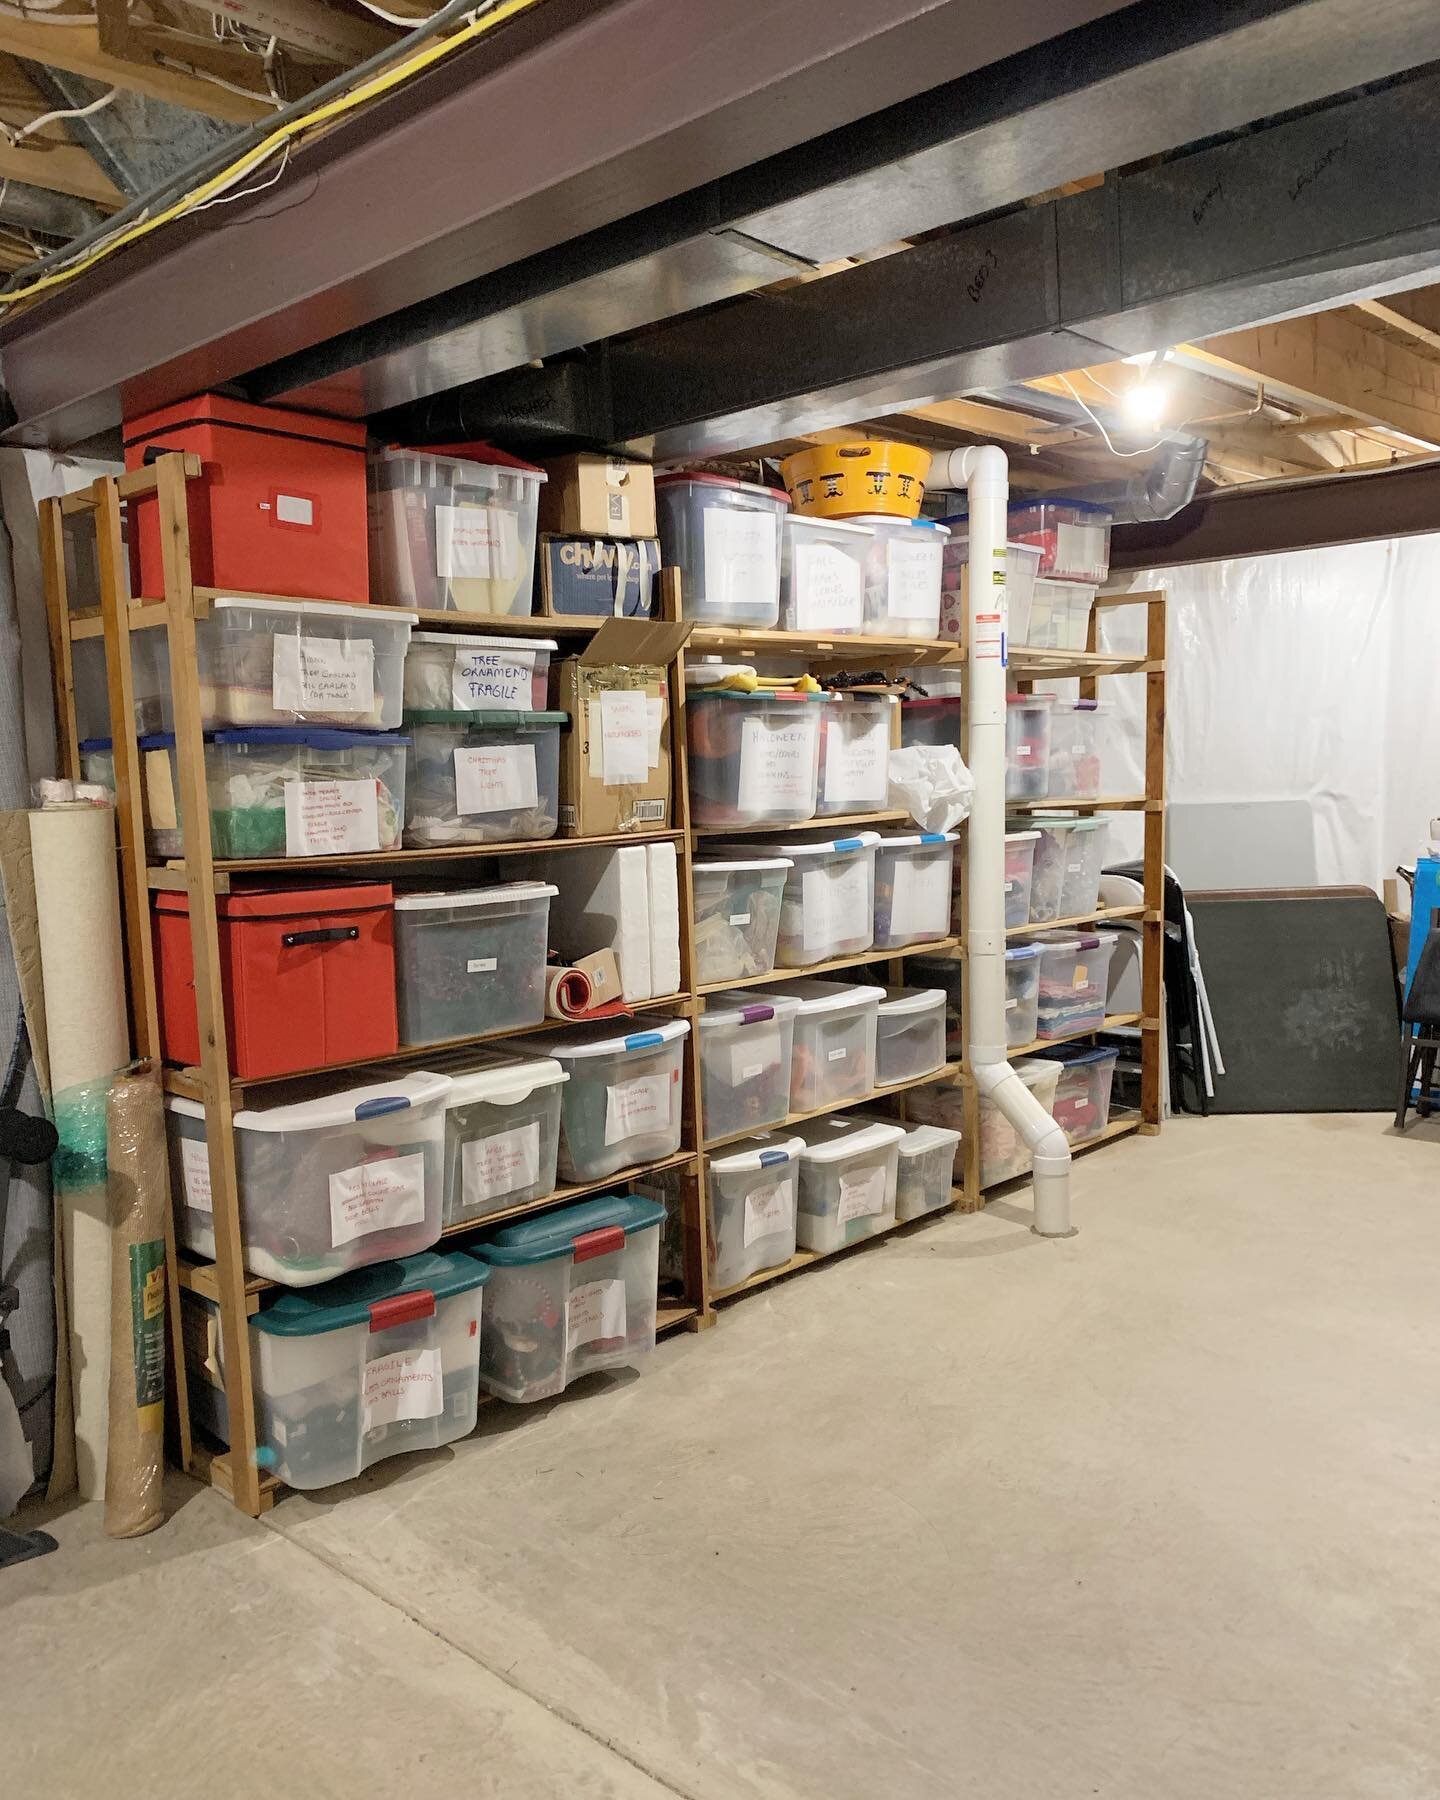 A basement transformation for the books!

Not much needs to be said here, the photos speak for themselves. Every inch of this basement was assessed, downsized and better stored.

My clients now know where everything is and the amount of floor space t